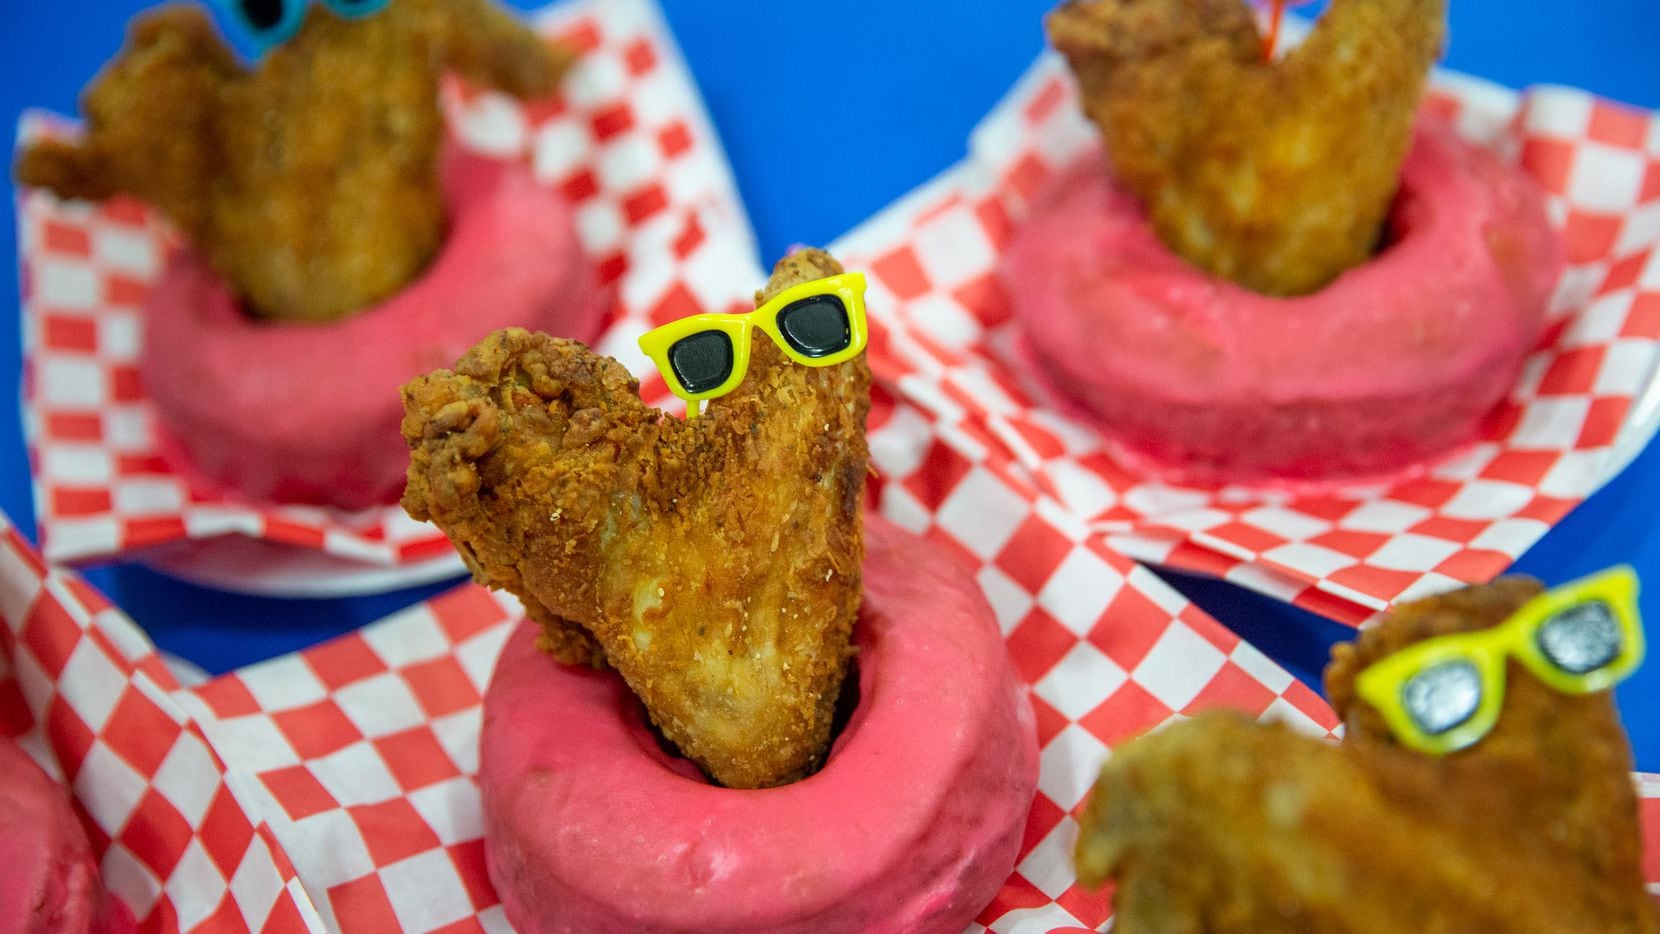 10 Fried Things I Ate at the Texas State Fair